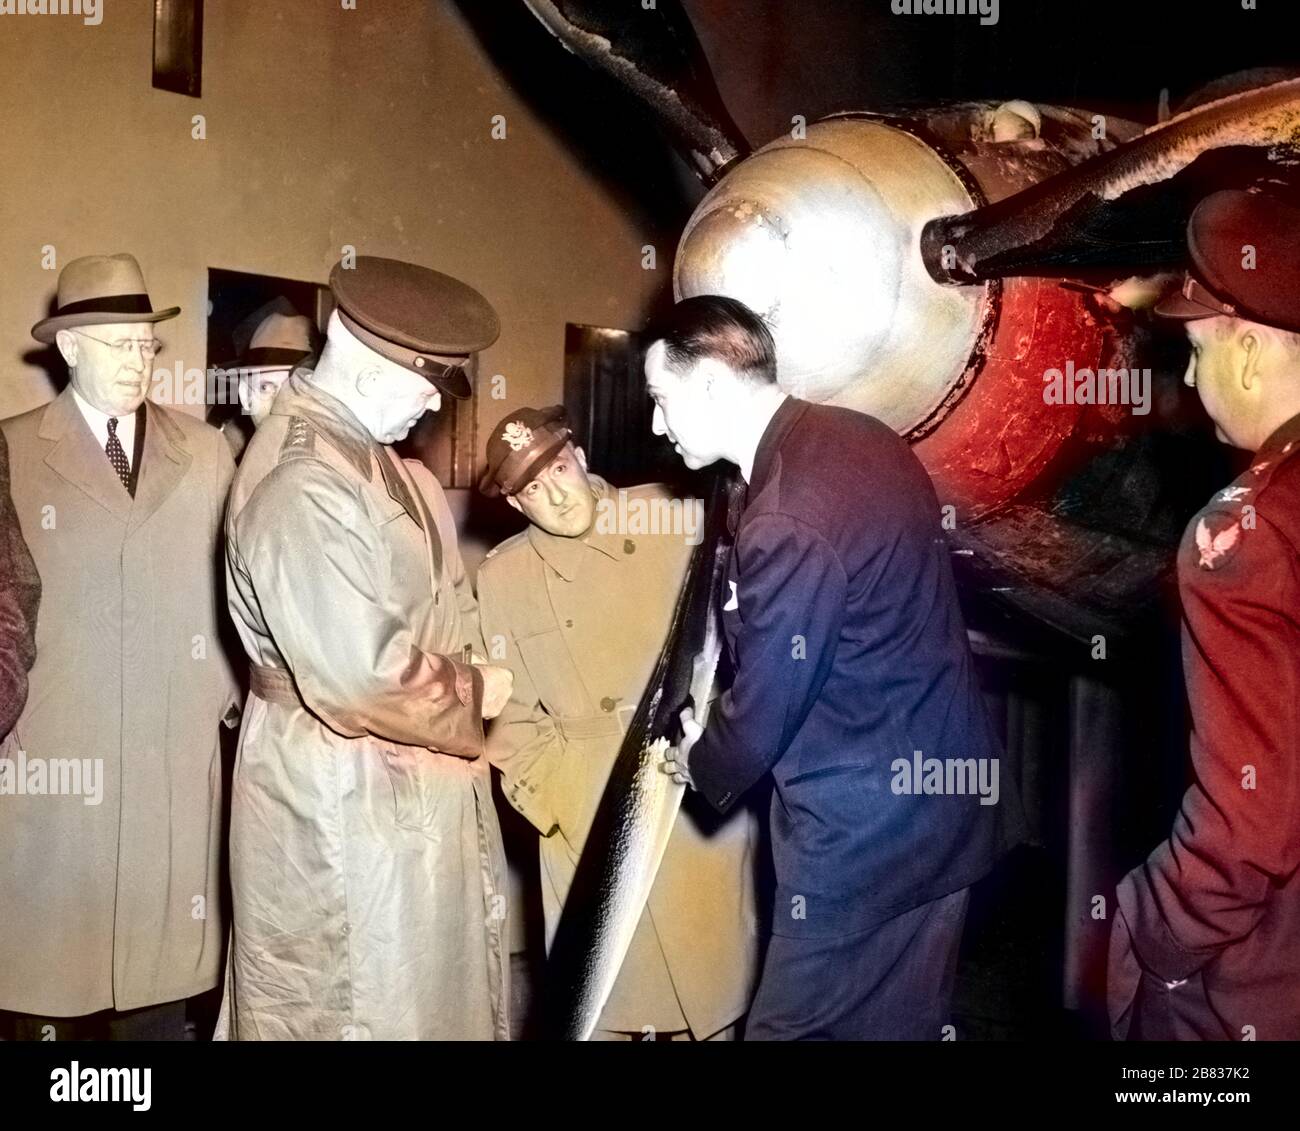 Henry Harley 'Hap' Arnold inspecting ice formation on propeller blades at the Aircraft Engine Research Laboratory in Cleveland, Ohio, November 9, 1944. Image courtesy National Aeronautics and Space Administration (NASA). Note: Image has been digitally colorized using a modern process. Colors may not be period-accurate. () Stock Photo